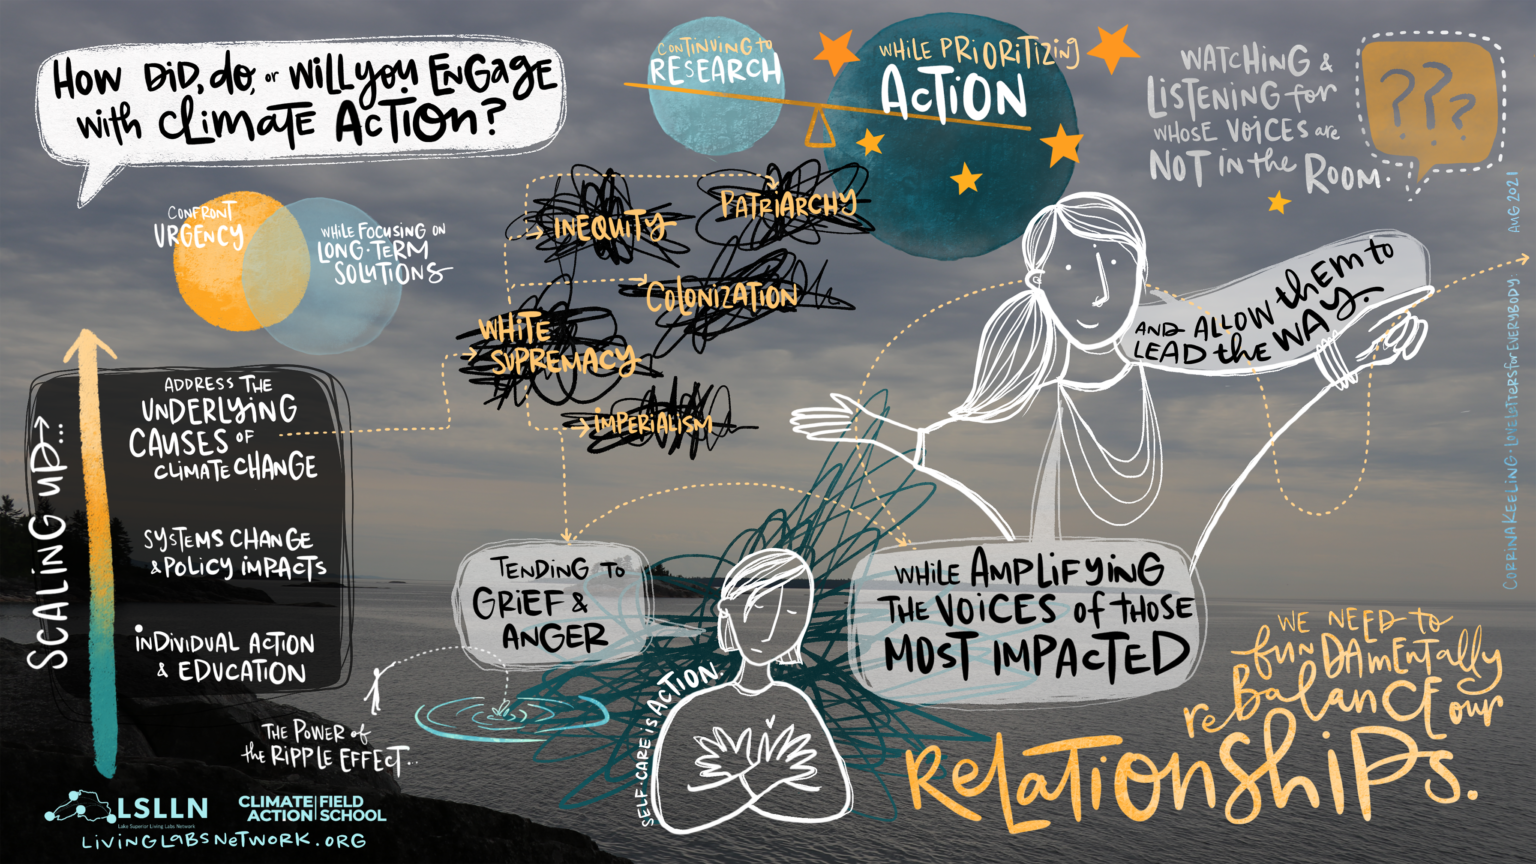 Graphic drawn during panel of "How did, do, and will you engage with climate action?" with many phrases, in particular "We need to fundamentally rebalance our relationships".